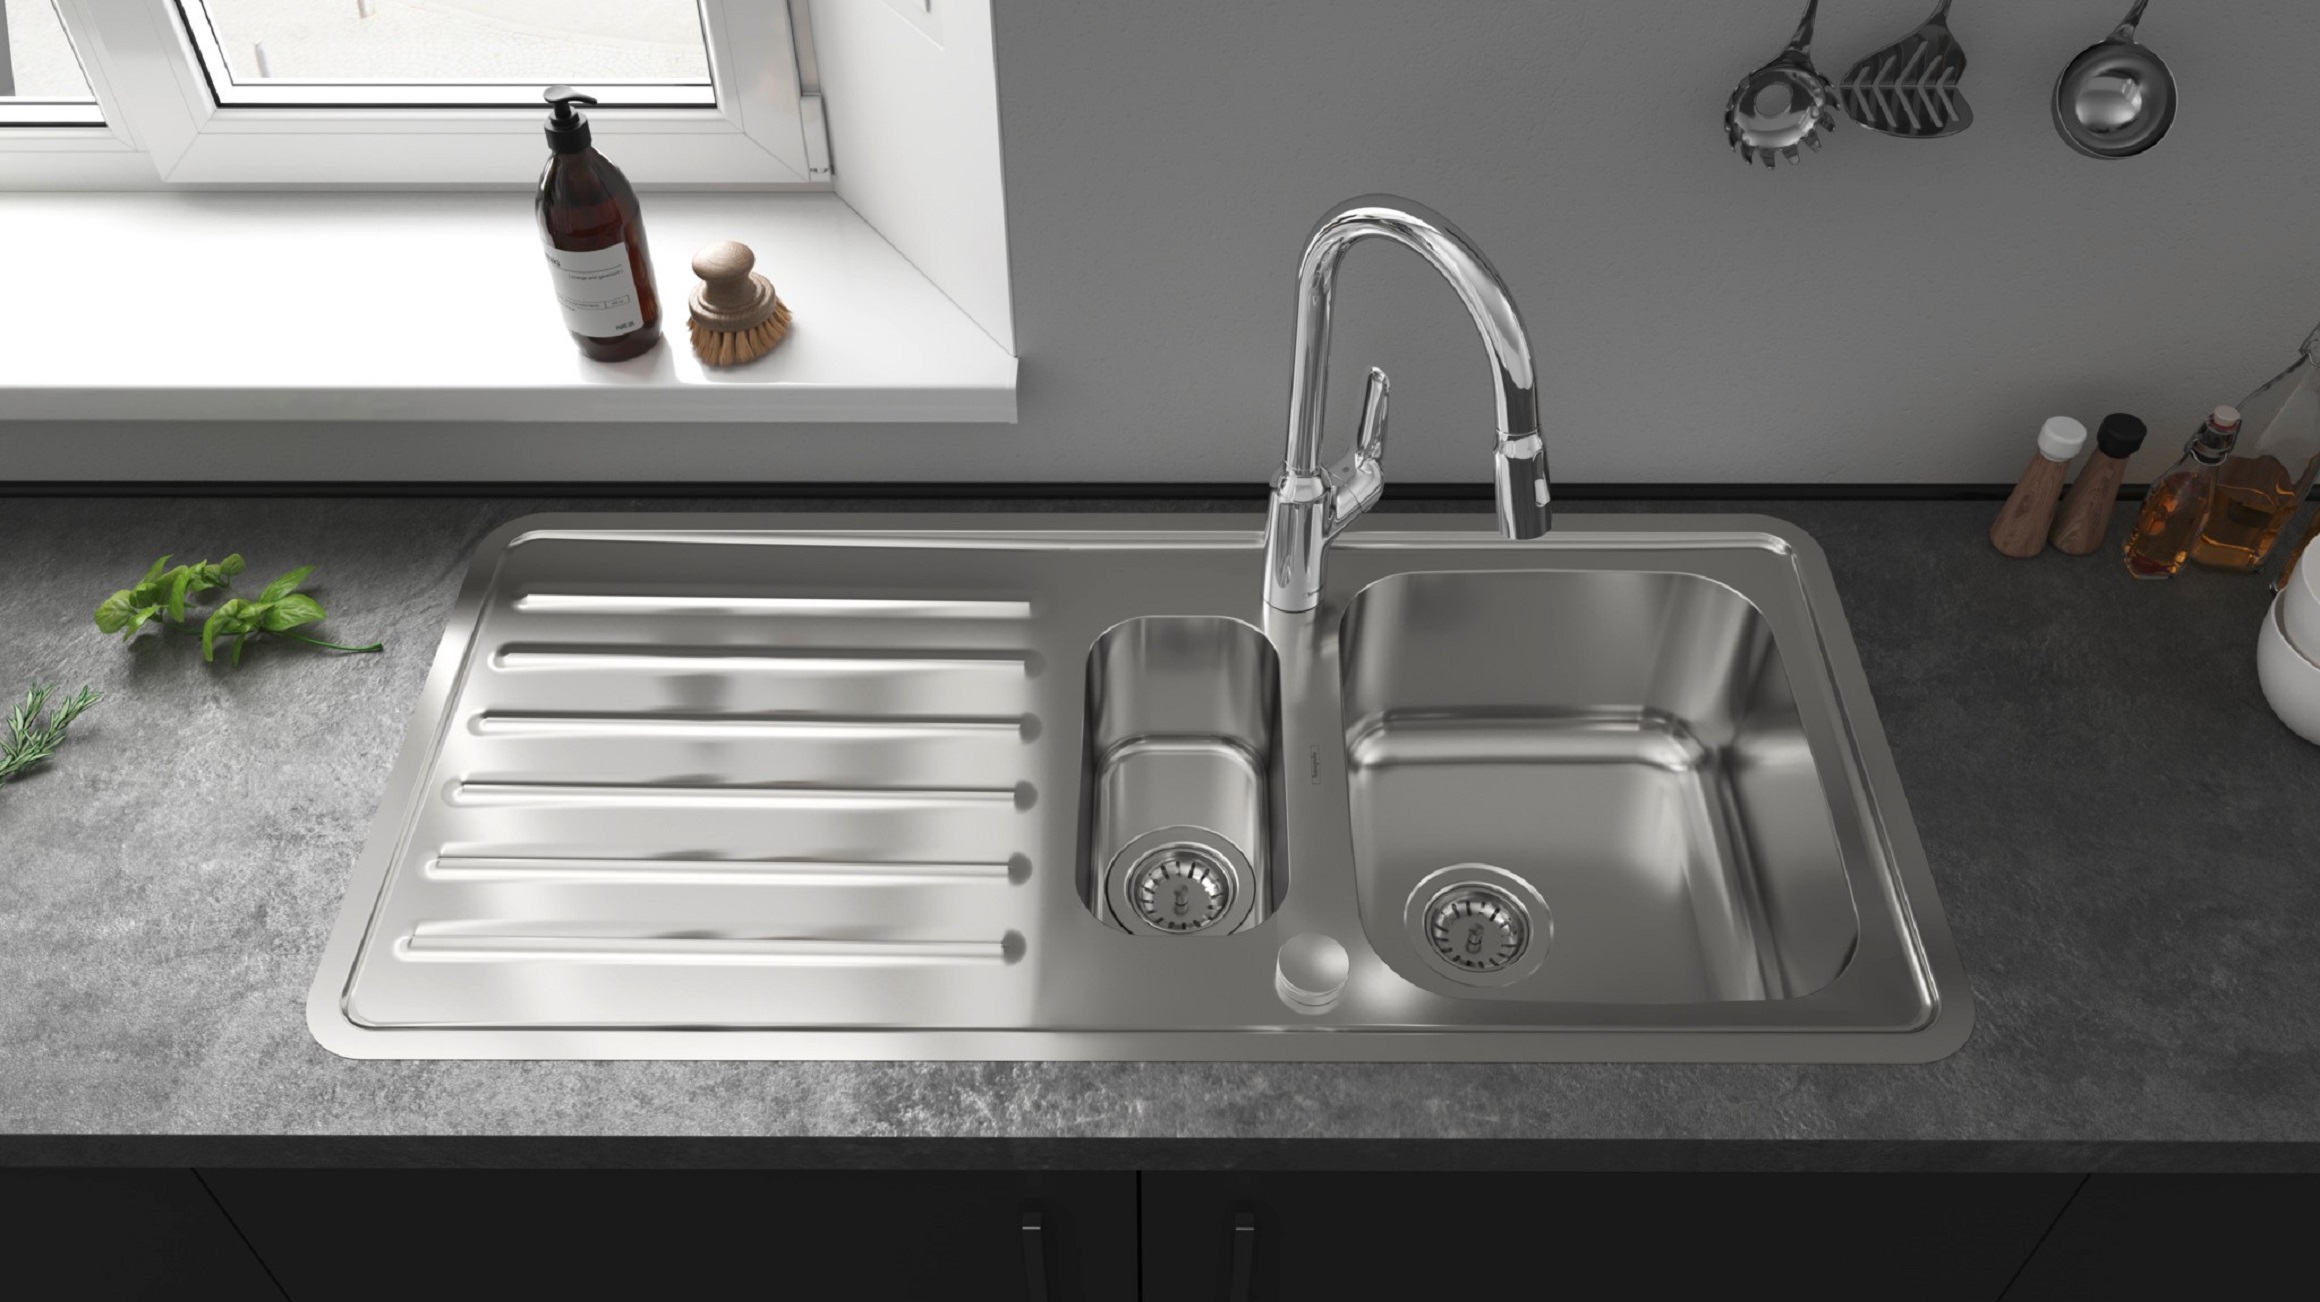 Affordable Stainless Steel Sinks With Top Of The Range Fixtures Hansgrohe Pro Int